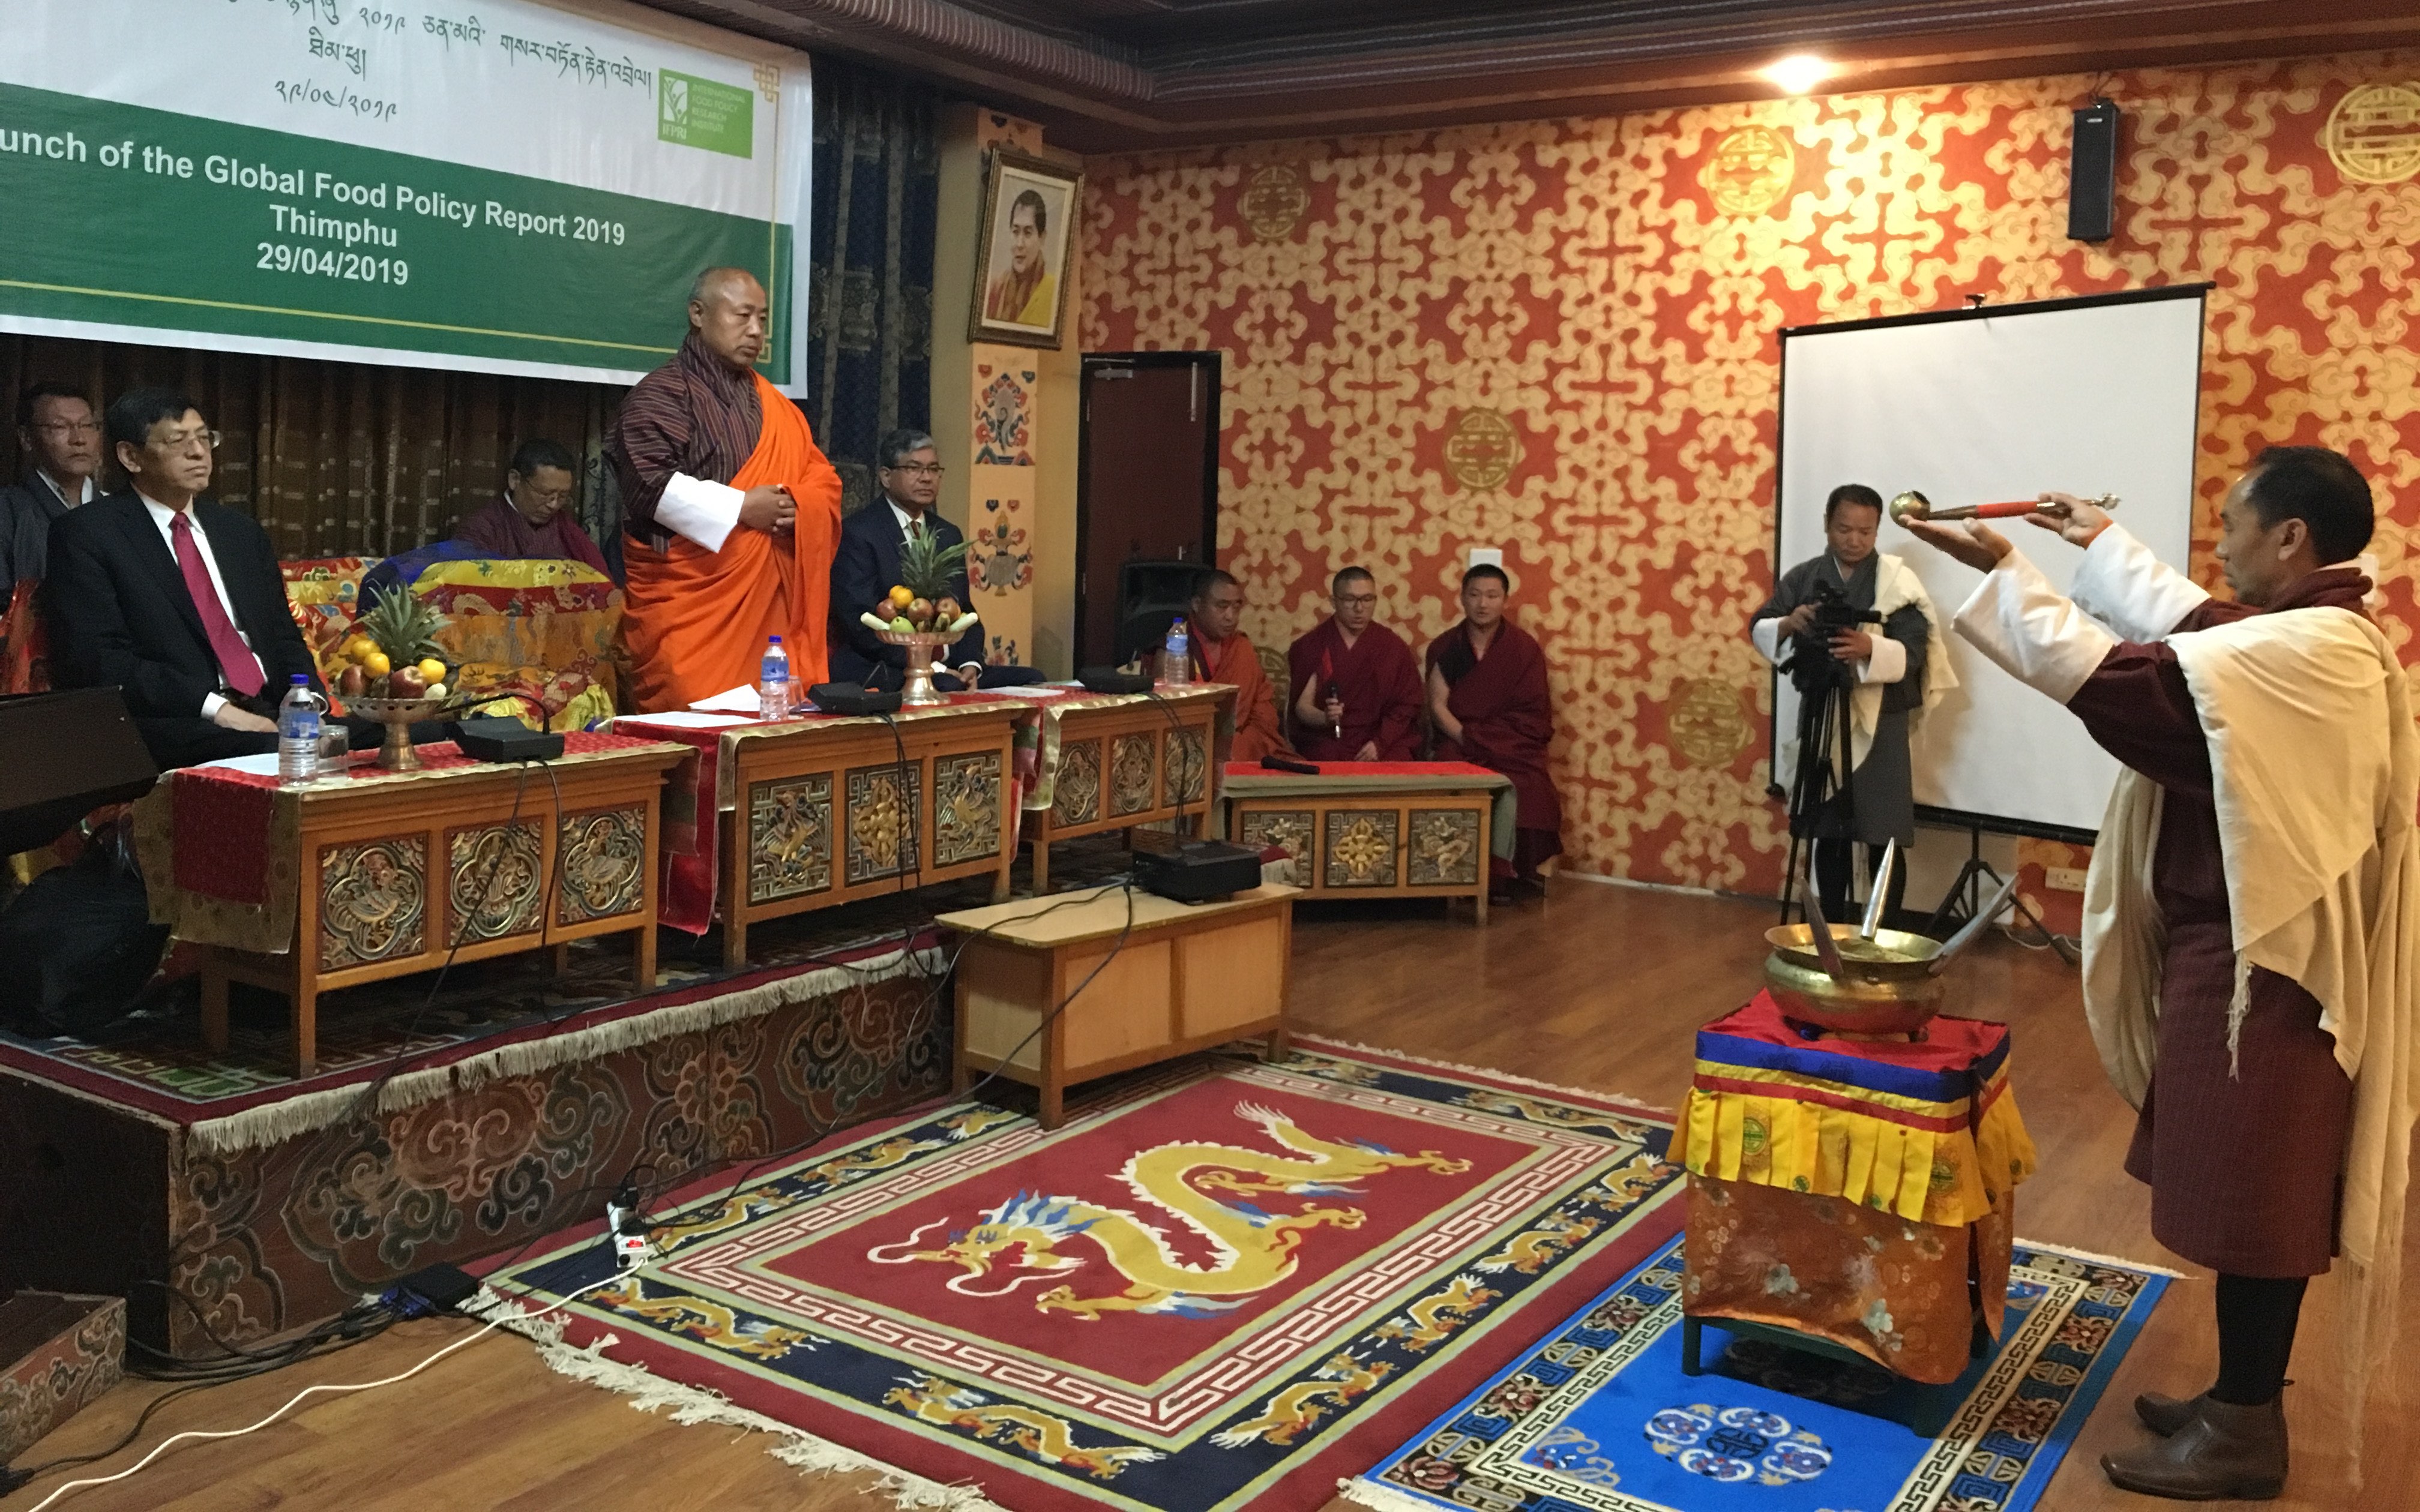 2019 Global Food Policy Report Bhutan launch: Charting paths to rural revitalization